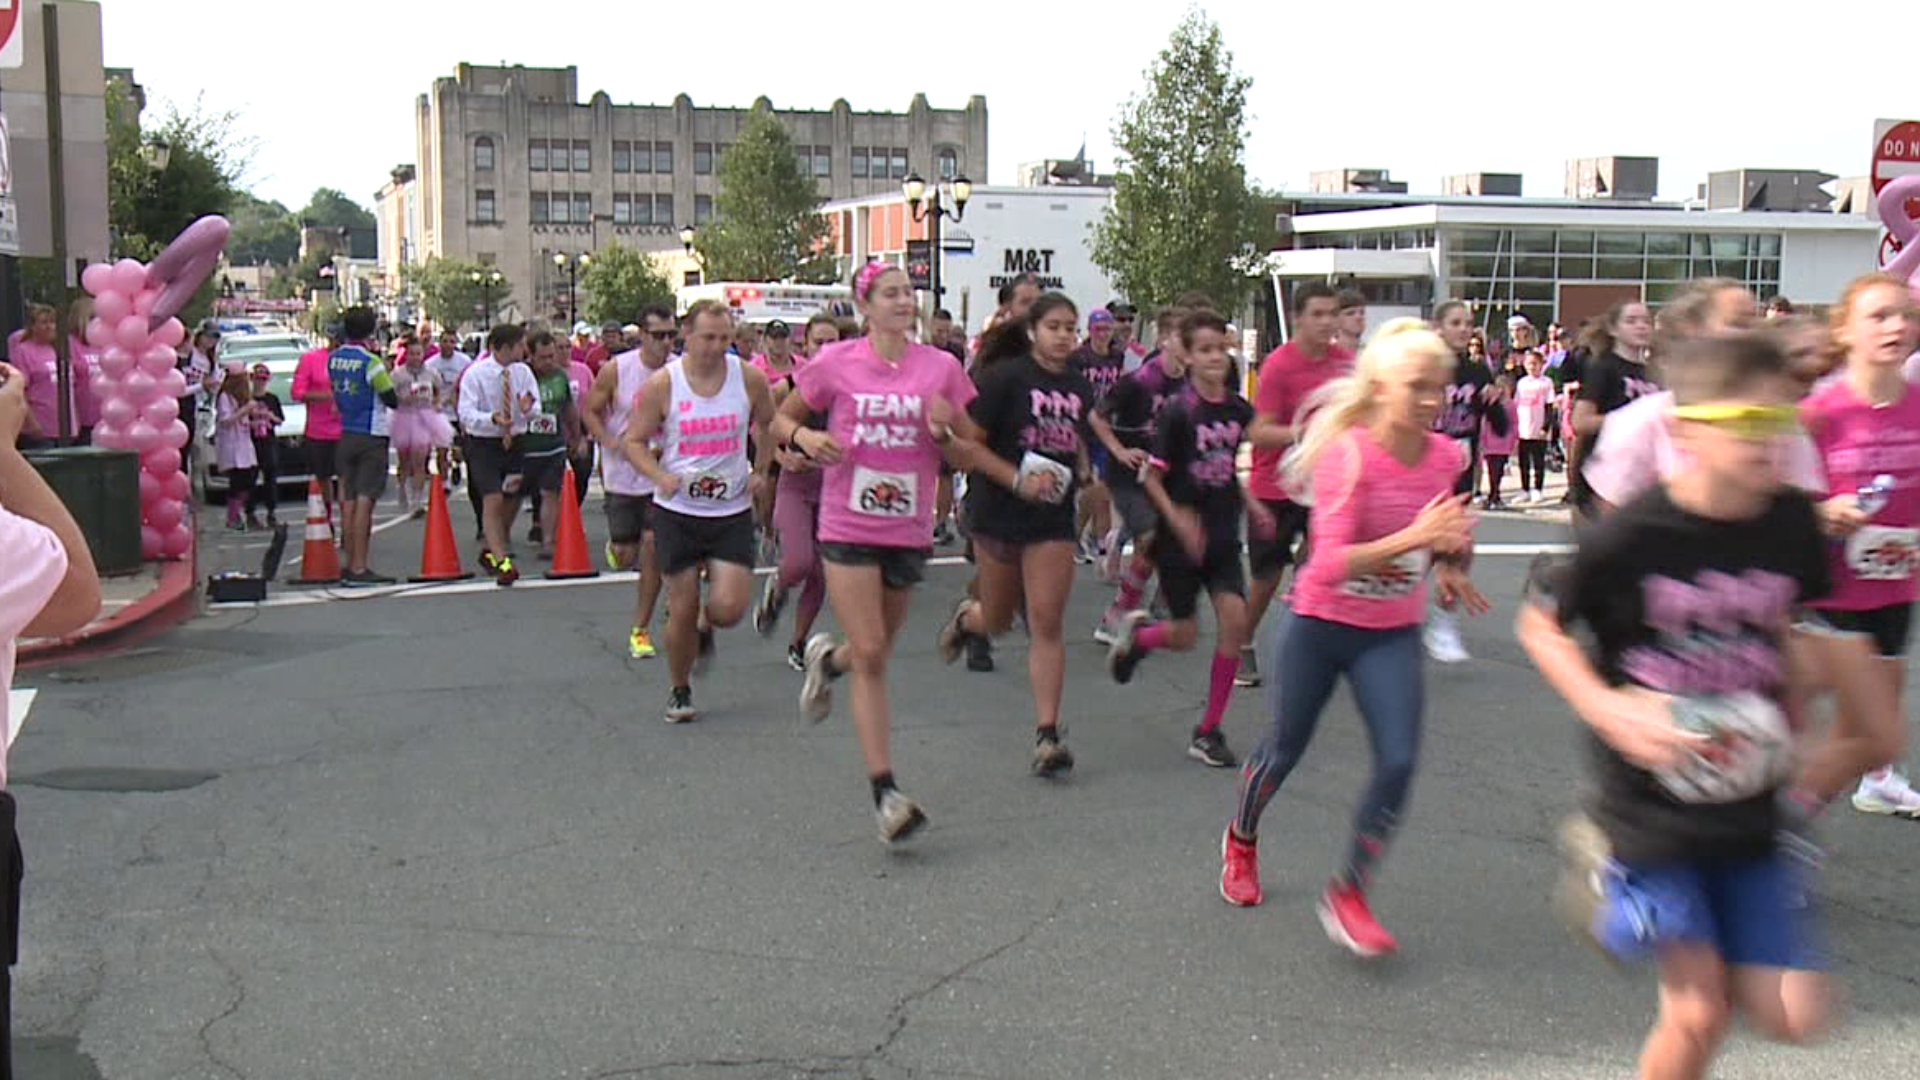 The annual event on Saturday included a 5K, a family fun walk, and a Gentlemen's Dash.